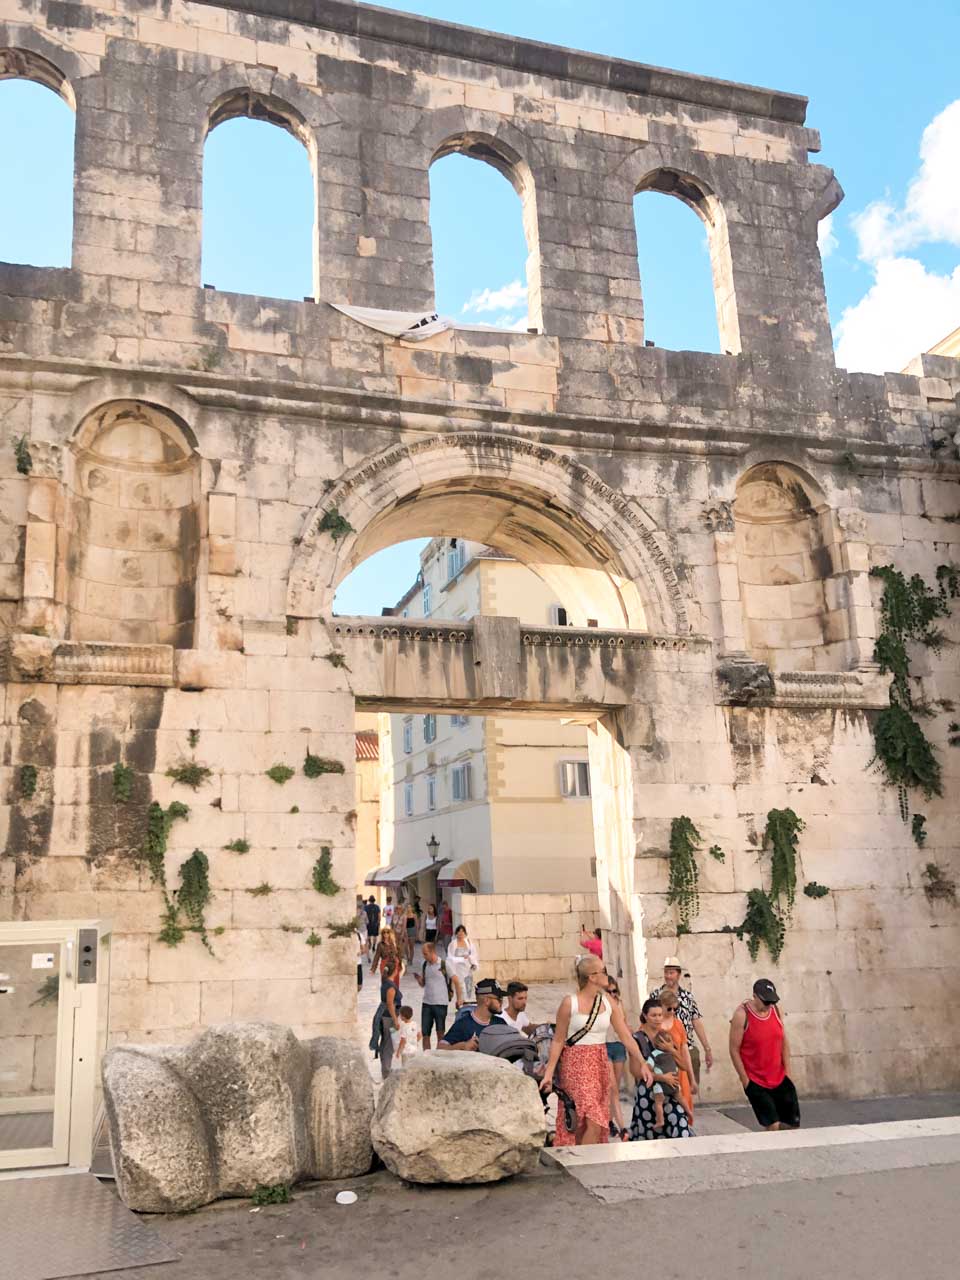 Silver Gate of Diocletian's Palace in Split Old Town, Croatia